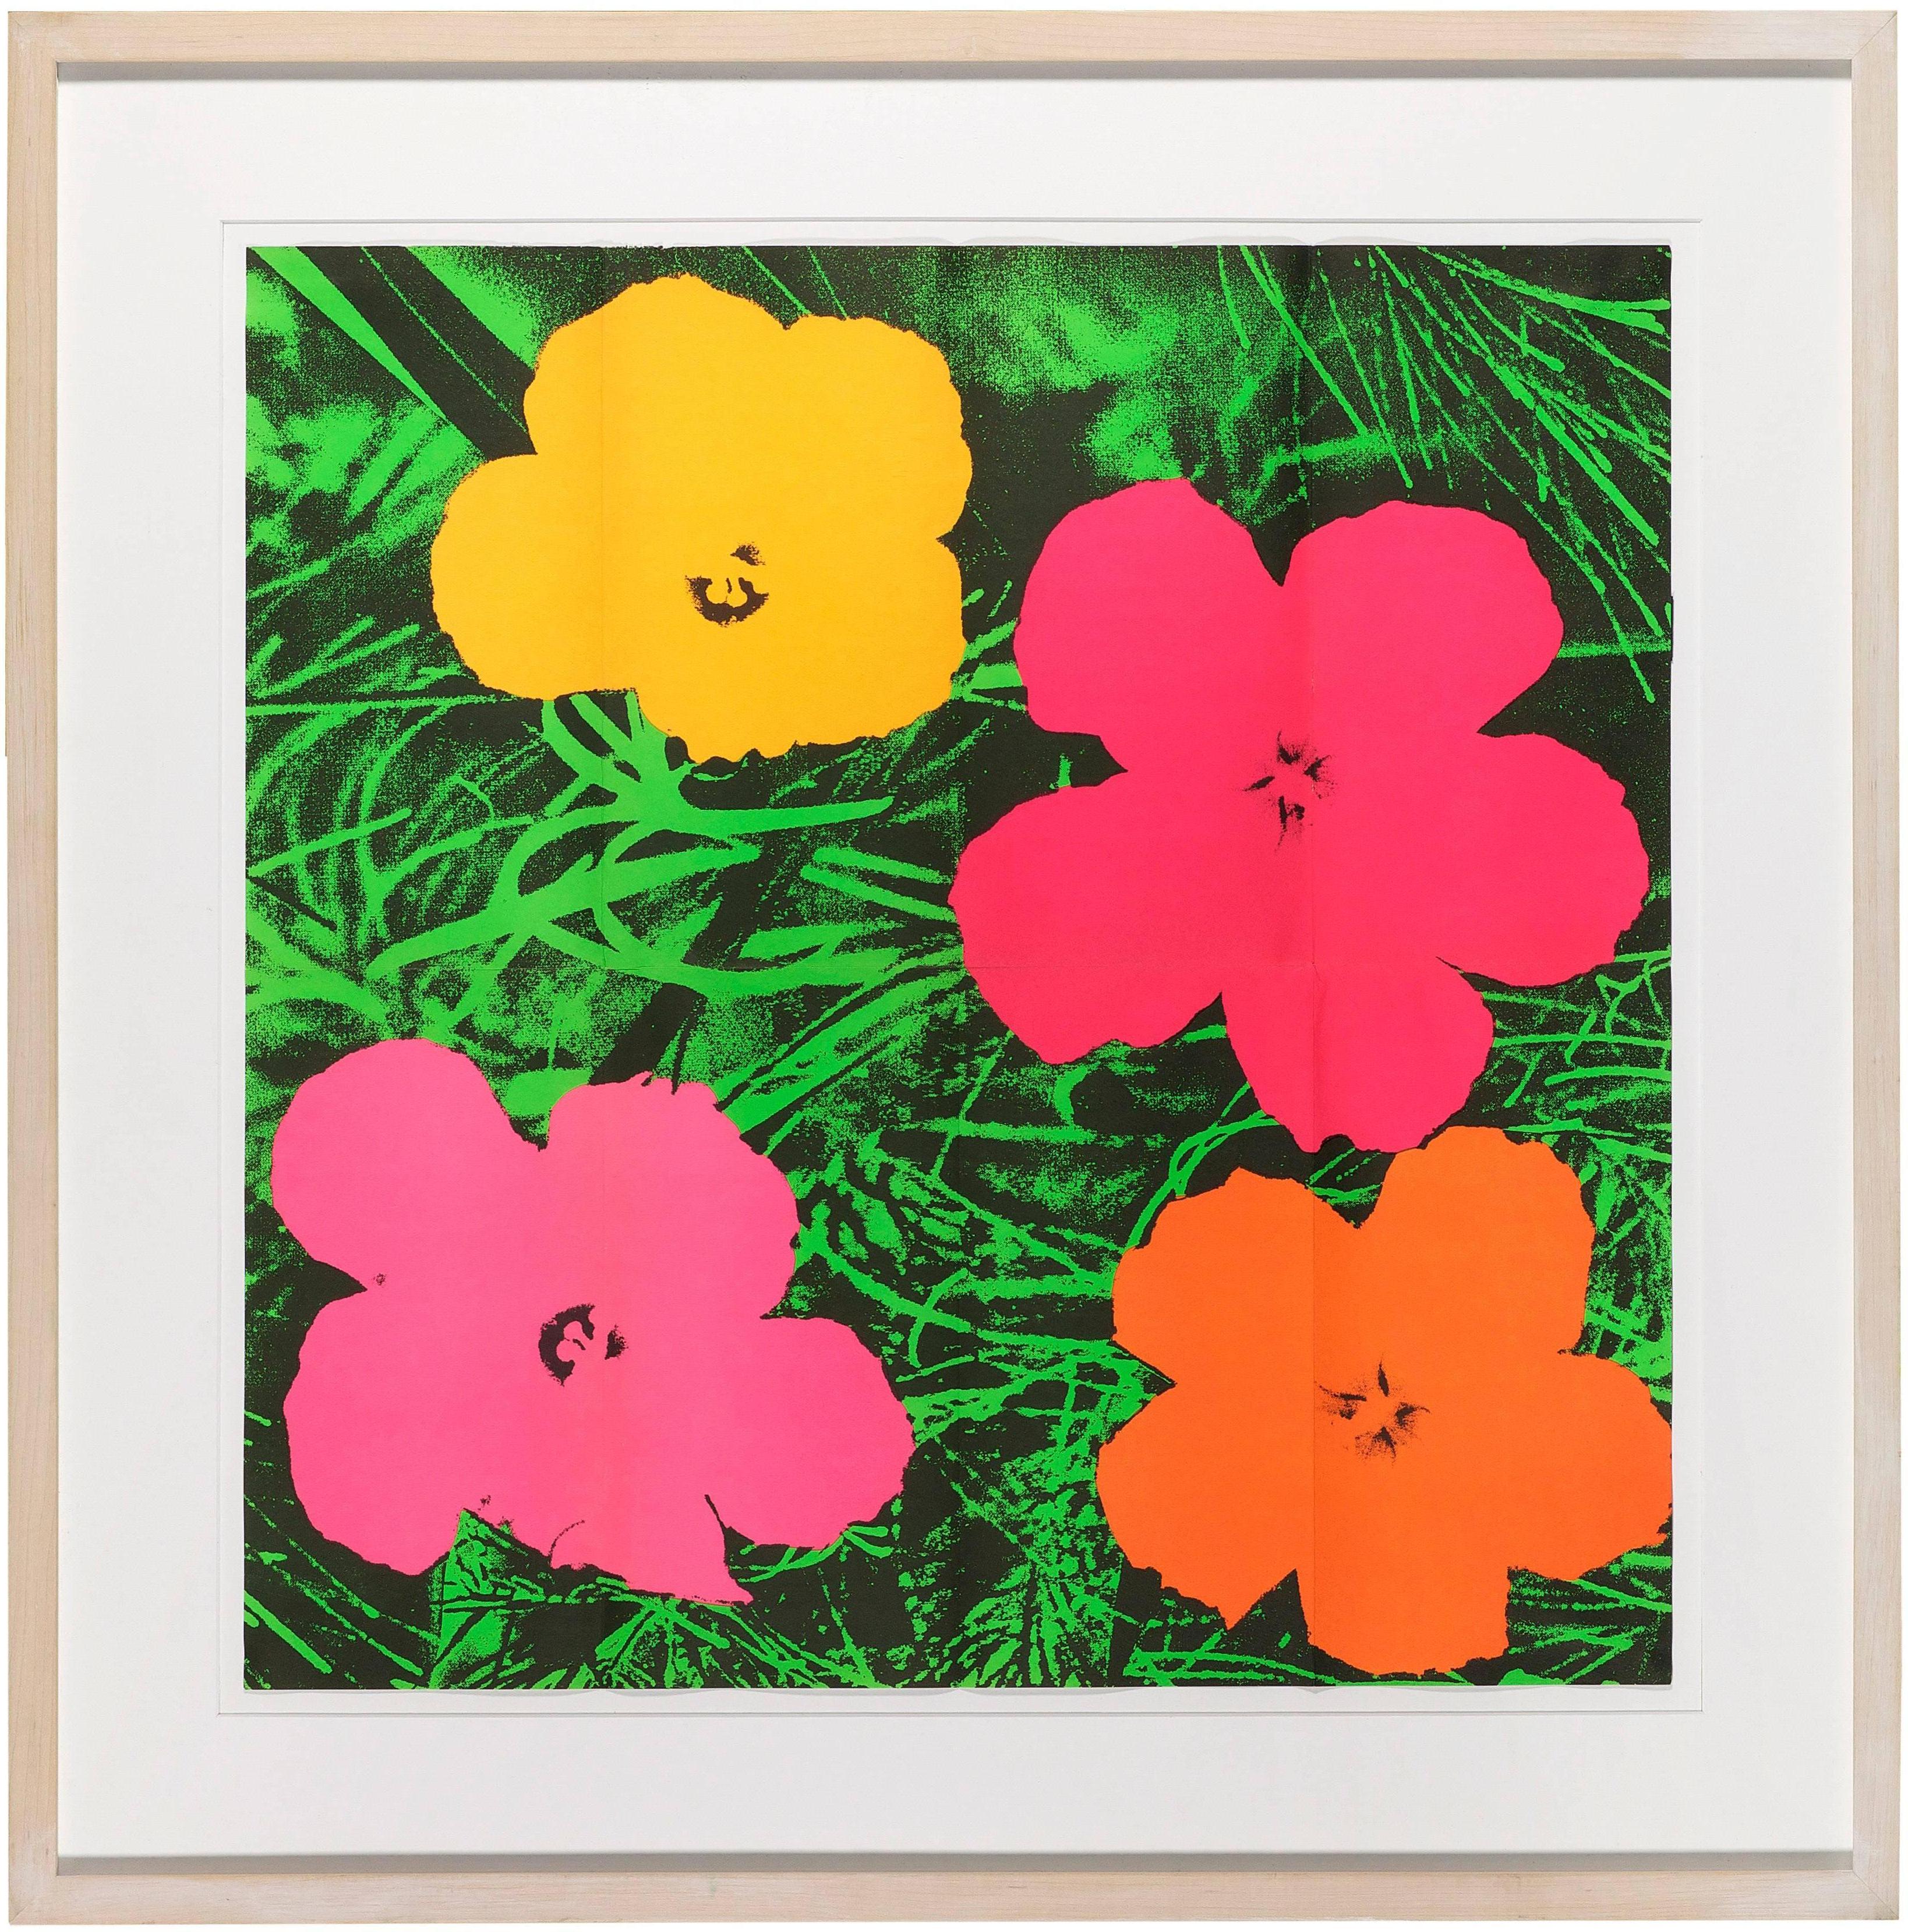 Andy Warhol Flowers, 1964 (invitation for Leo Castelli exhibition) - Print by (after) Andy Warhol